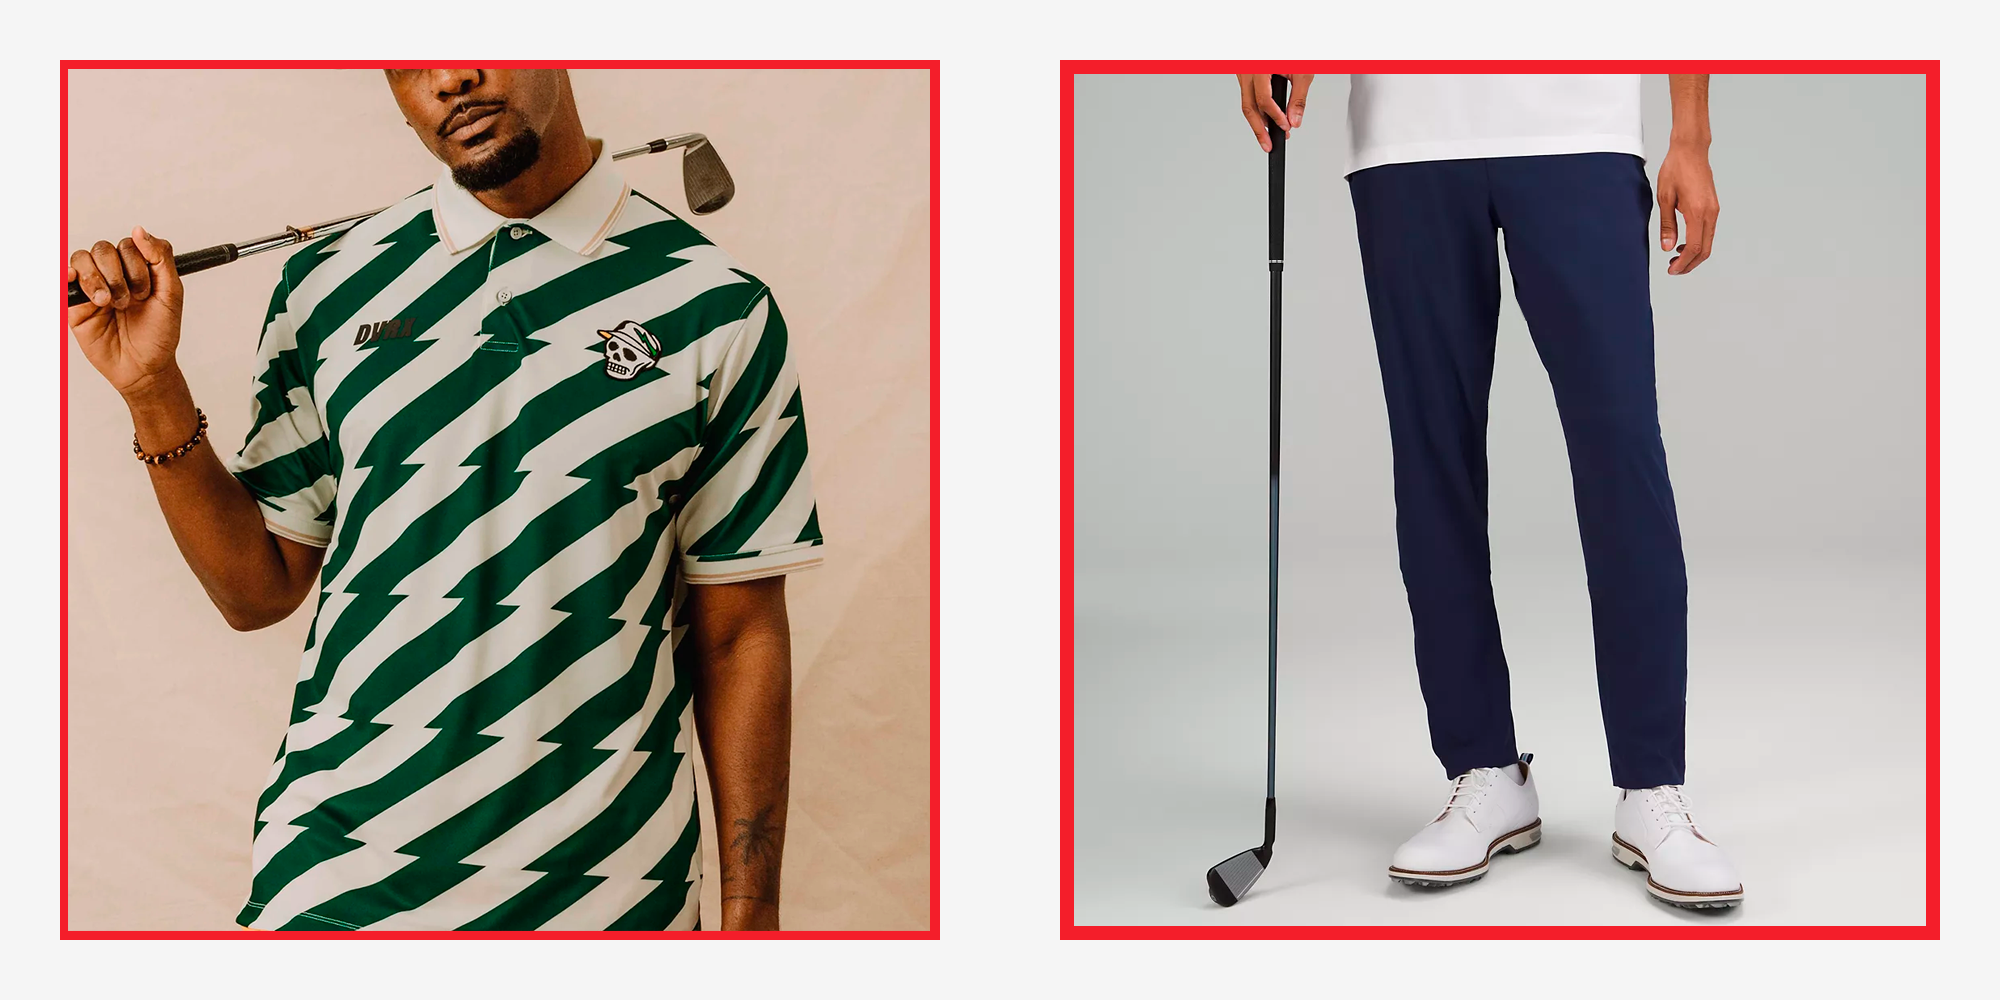 x Justin Thomas Slim Tech Stretch Trousers Basic Sand  AW19  Trousers  Polo  Ralph Lauren  All Square Golf